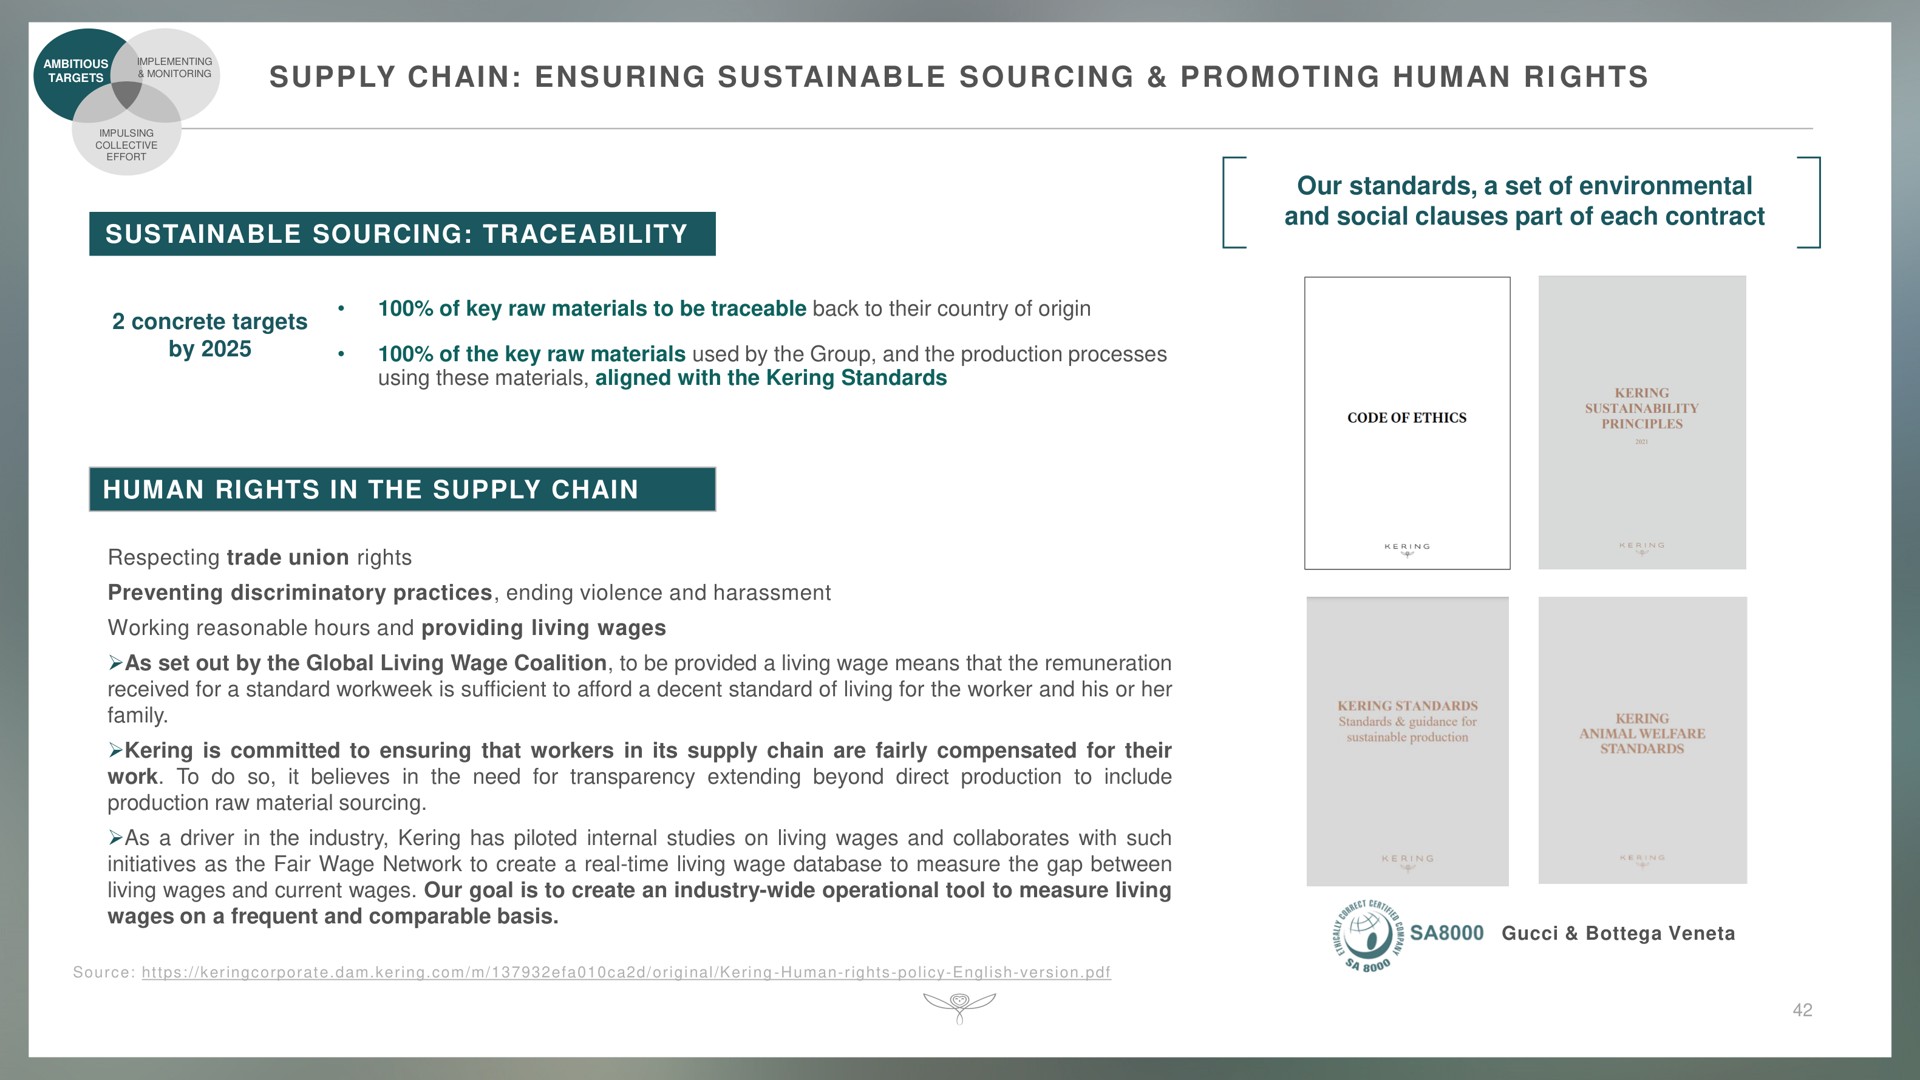 supply chain ensuring sustainable sourcing promoting human sustainable sourcing traceability human rights in the supply chain our standards a set of environmental and social clauses part of each contract by key raw materials used by group production processes | Kering